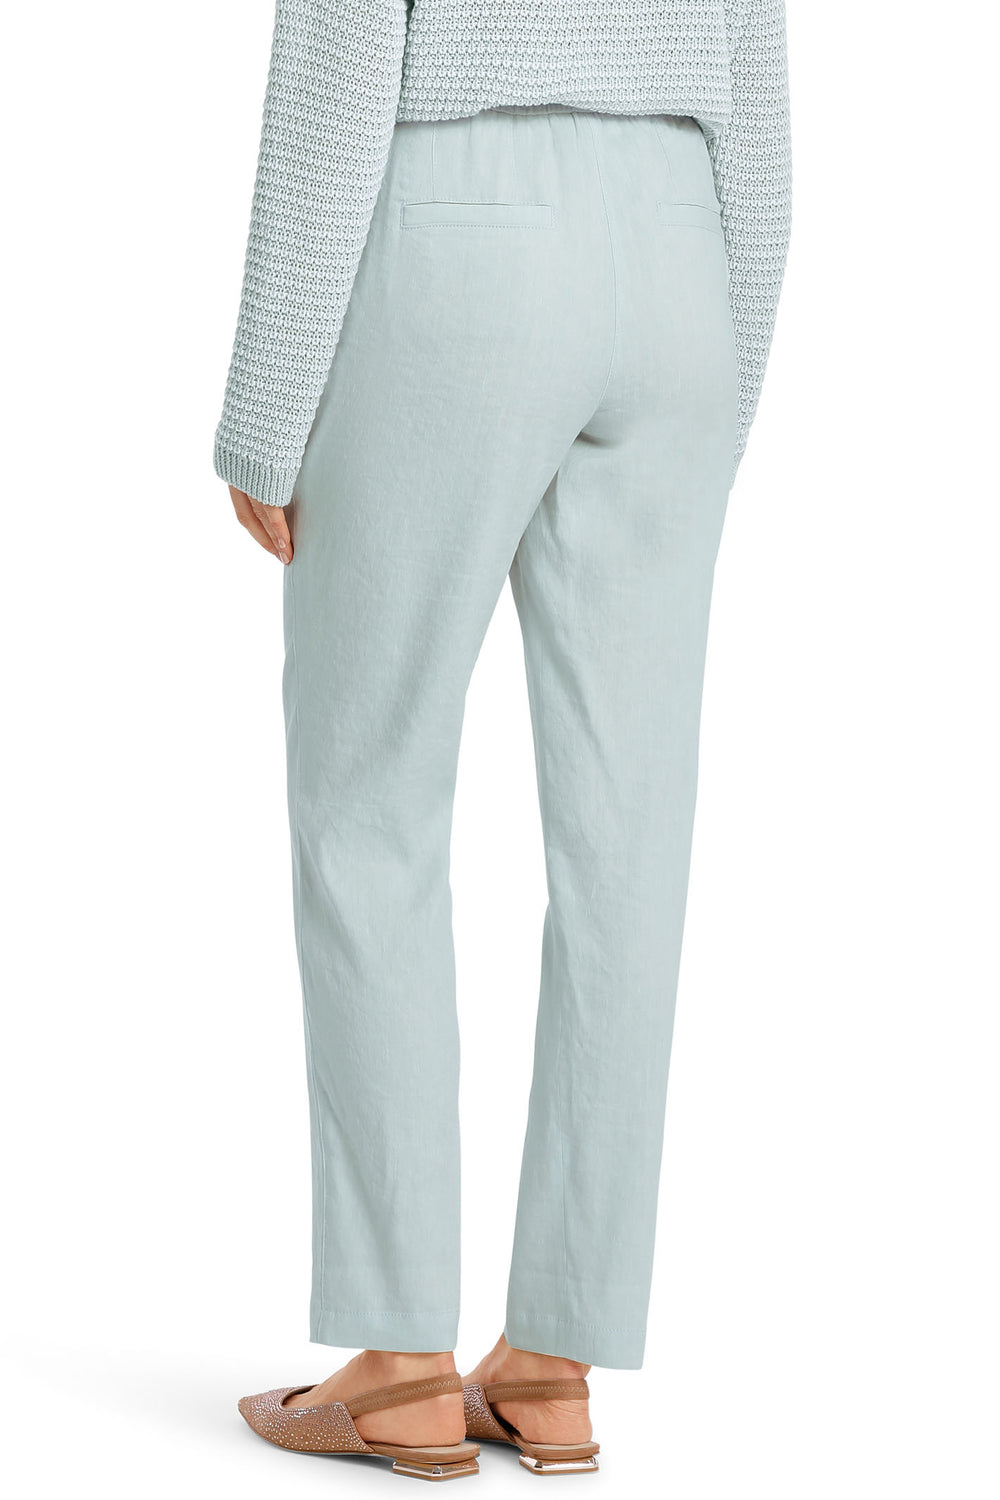 Marc Cain Collections WC 81.59 W47 302 Smoky Ice Blue Pull-On Linen Mix Trousers - Olivia Grace Fashion